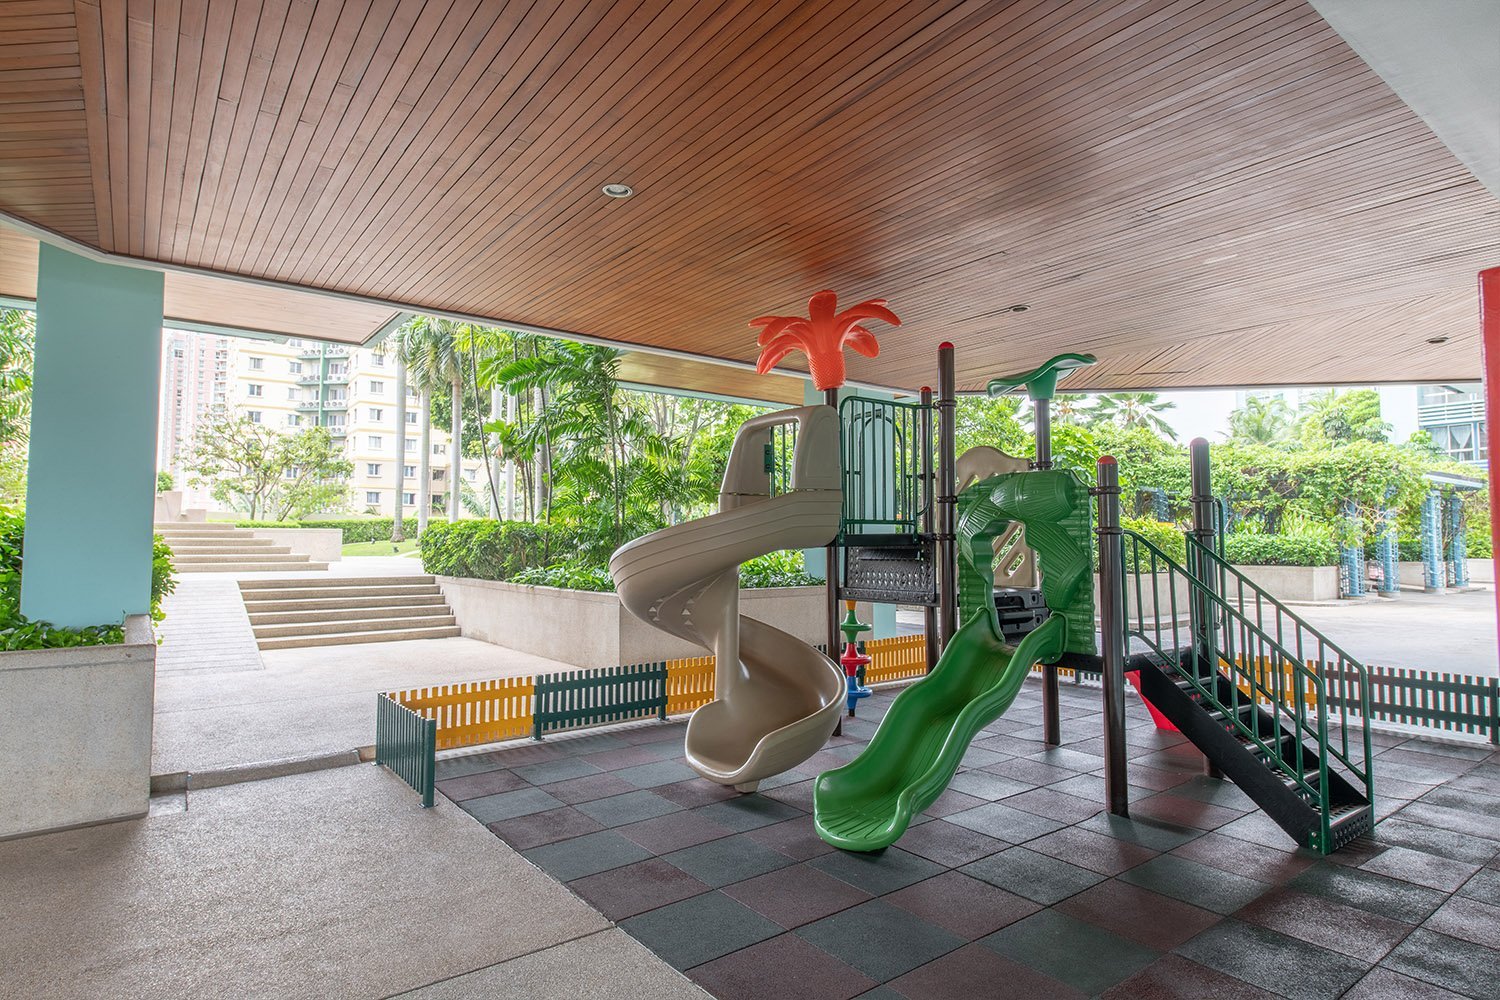 Kid-friendly spaces can be found at Bangkok Garden Apartment’s playground.